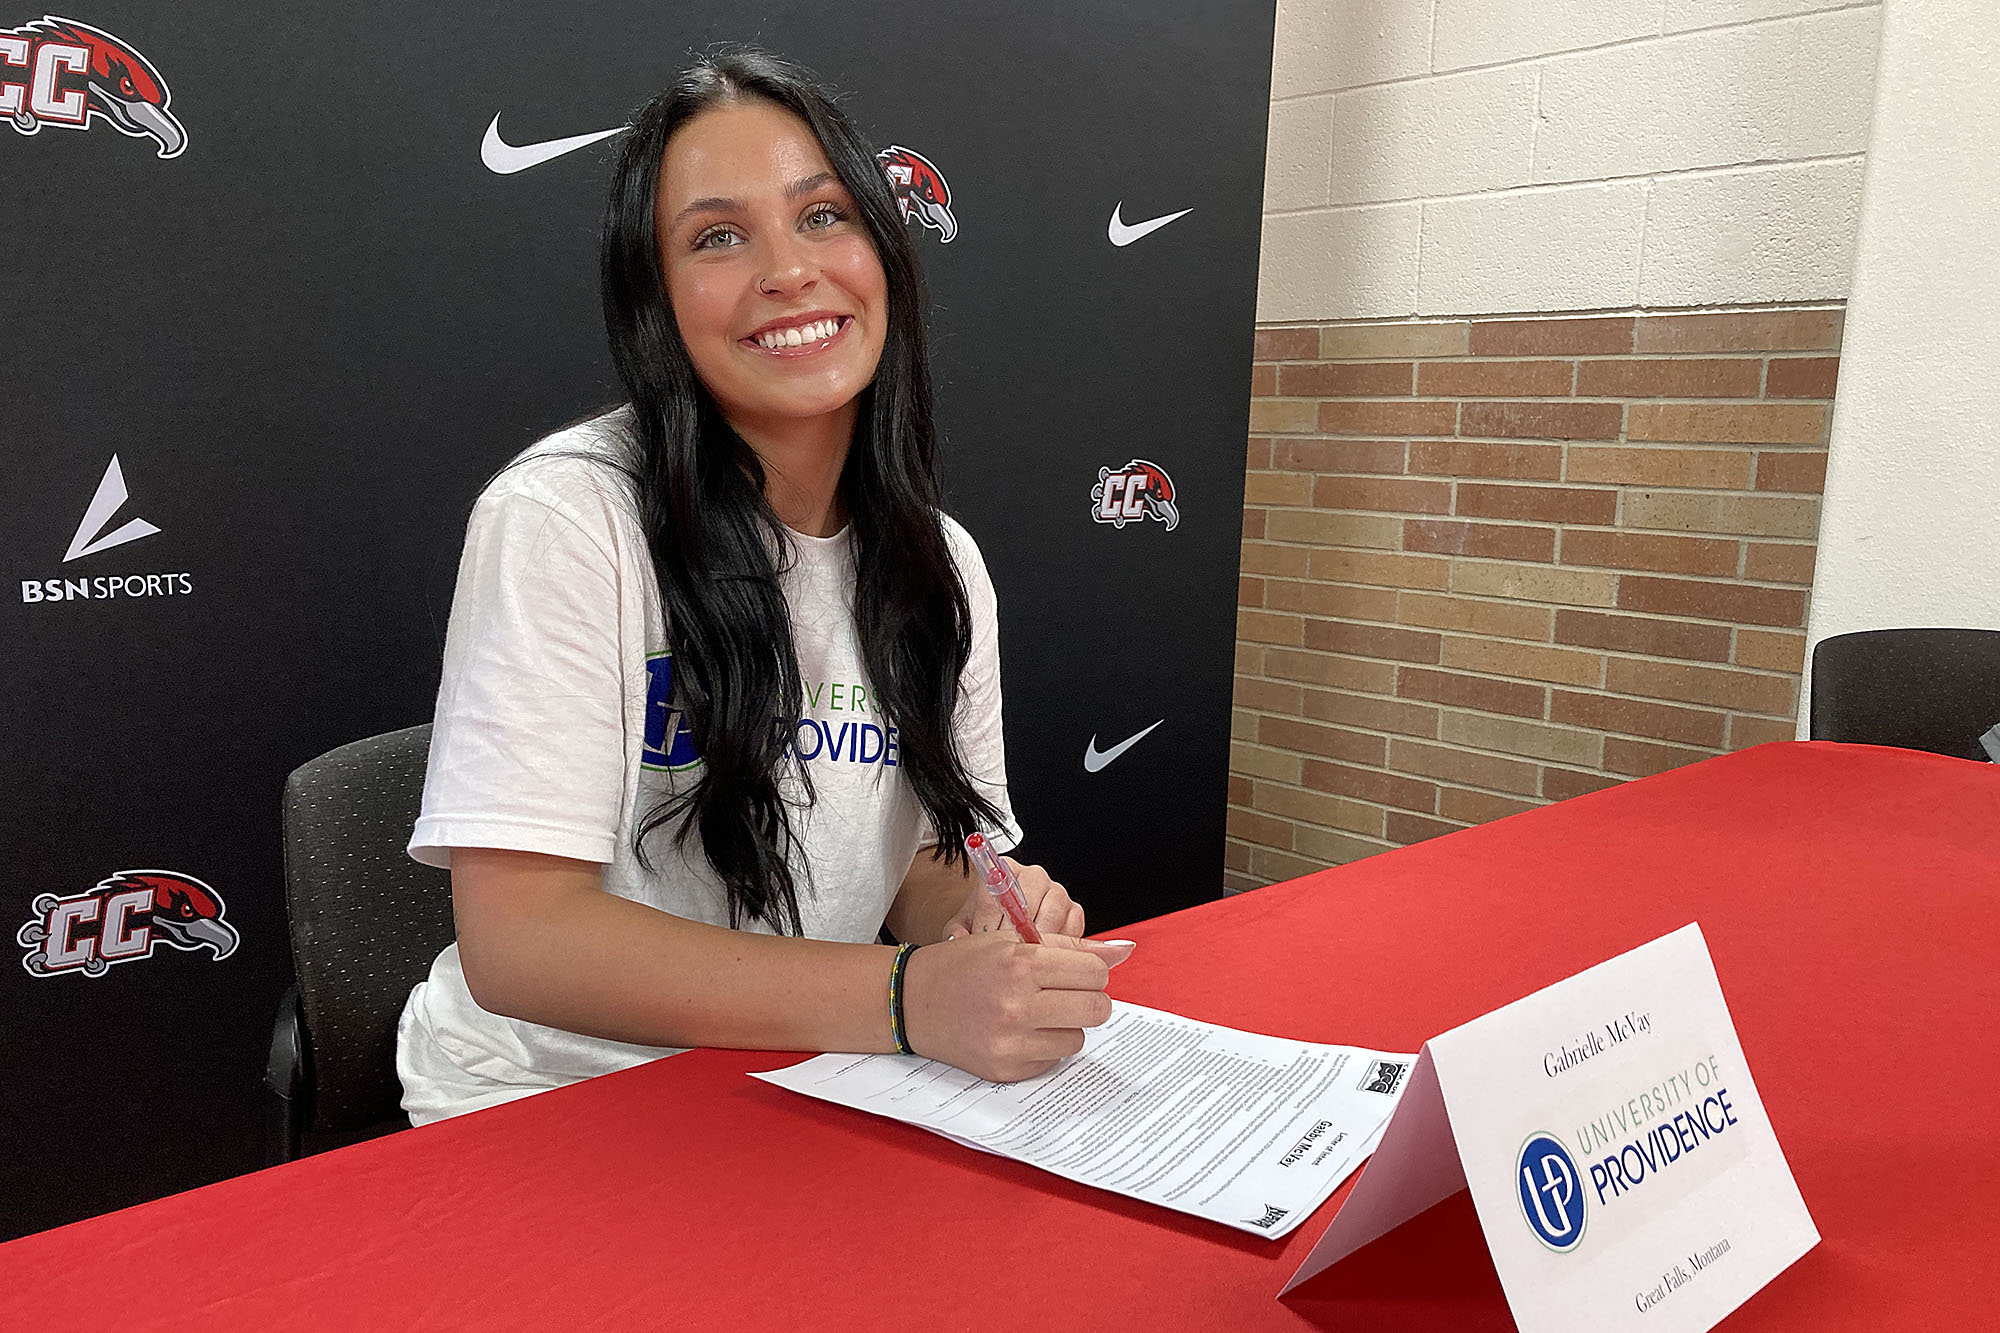 Photo of Casper College Soccer player Gabrielle McVay signing her letter of intent.